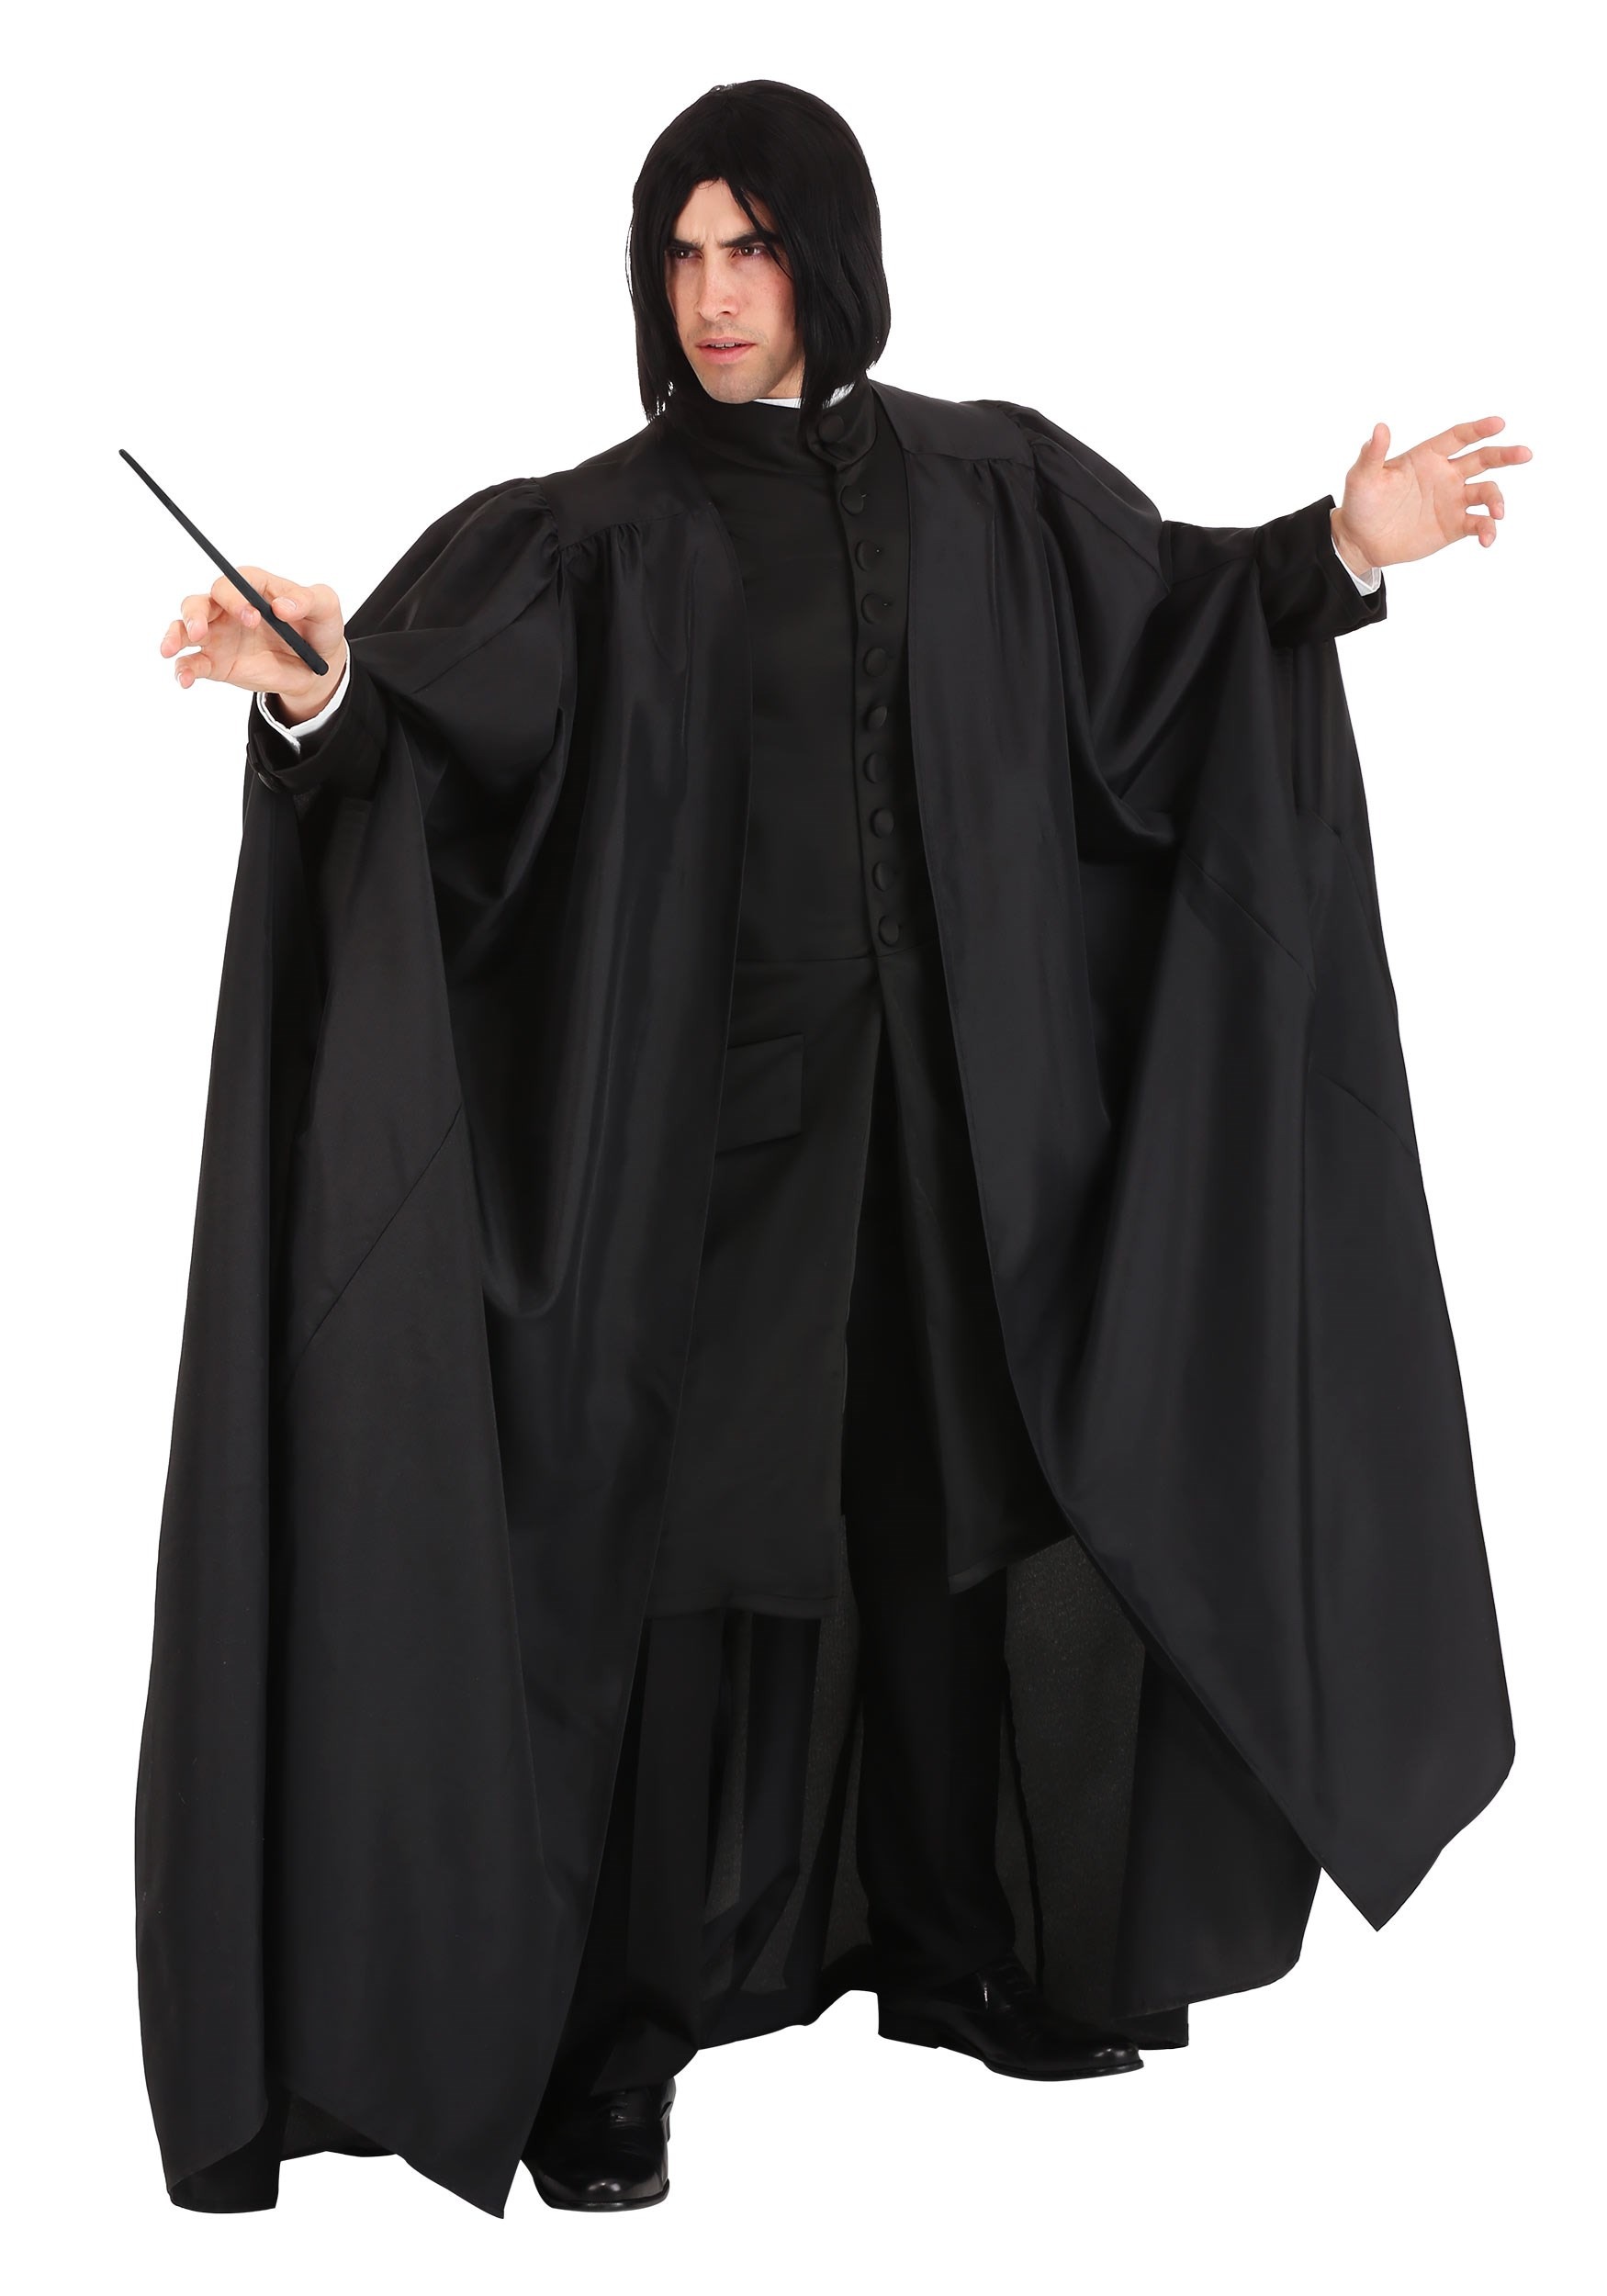 Photos - Fancy Dress Deluxe Jerry Leigh  Harry Potter Snape Costume for Men Black FUN1448AD 